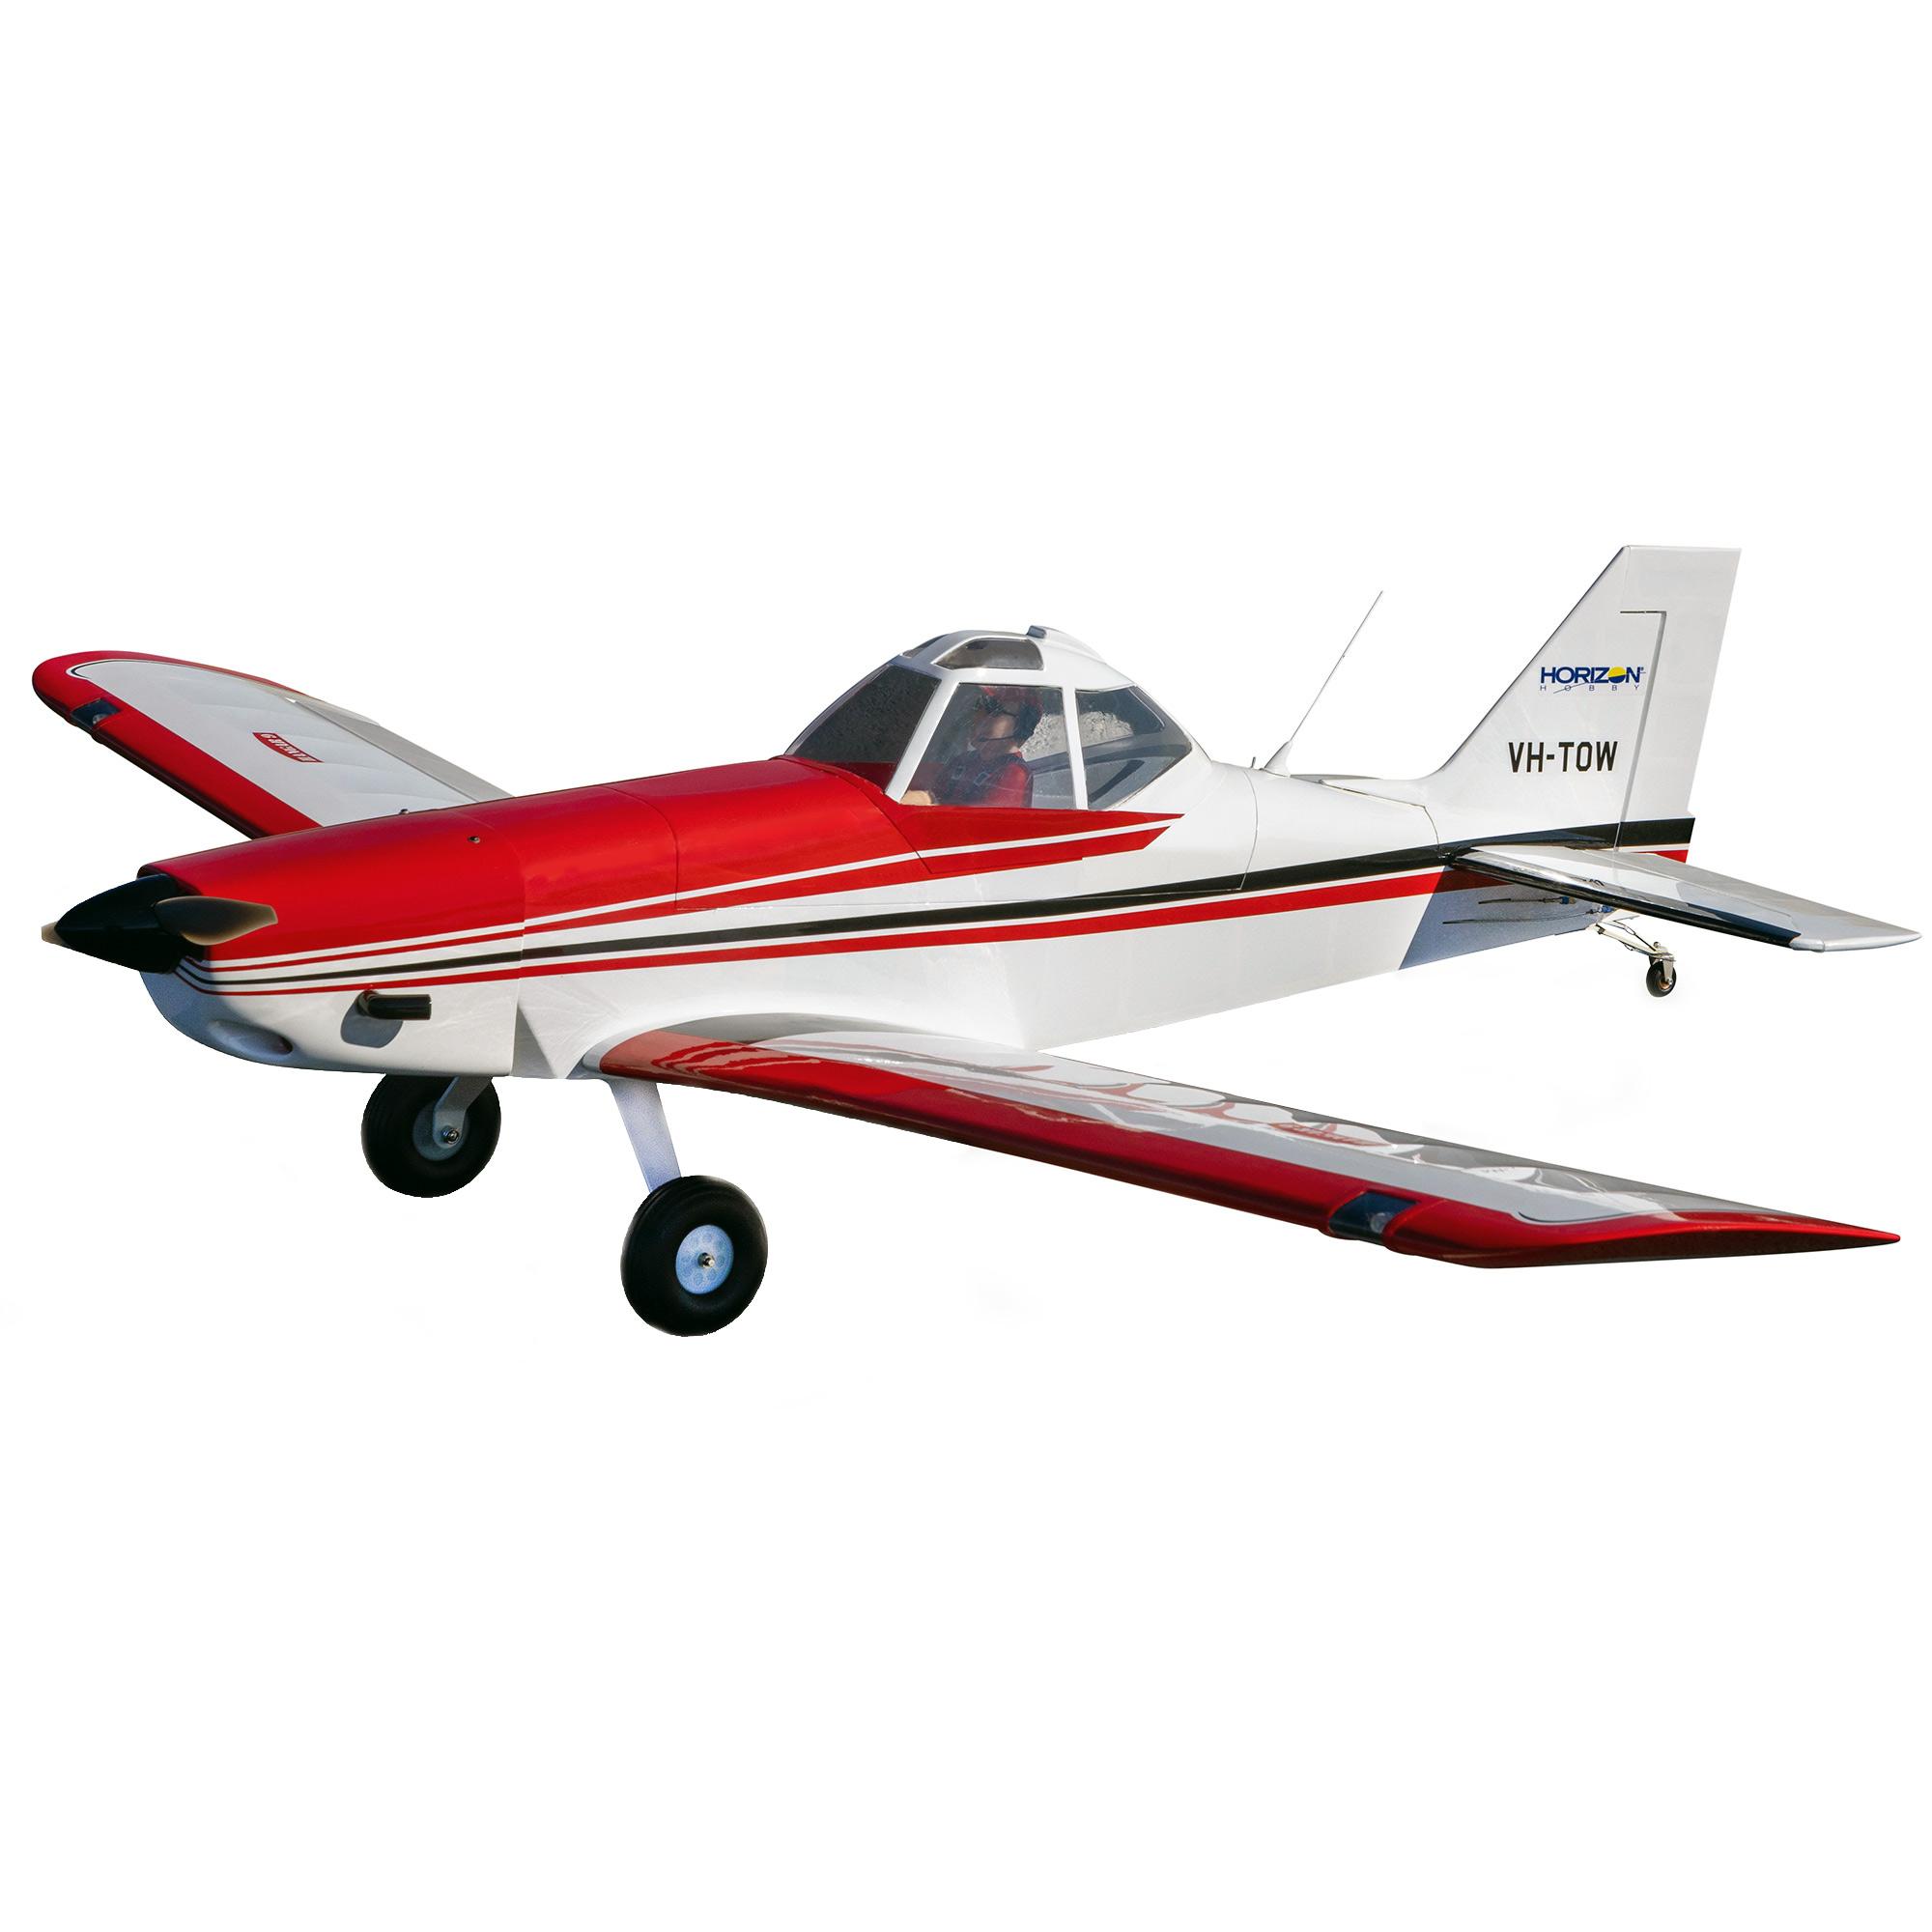 Gas Rc Airplane Kits For Sale: Benefits of Gas RC Airplane Kits for Sale